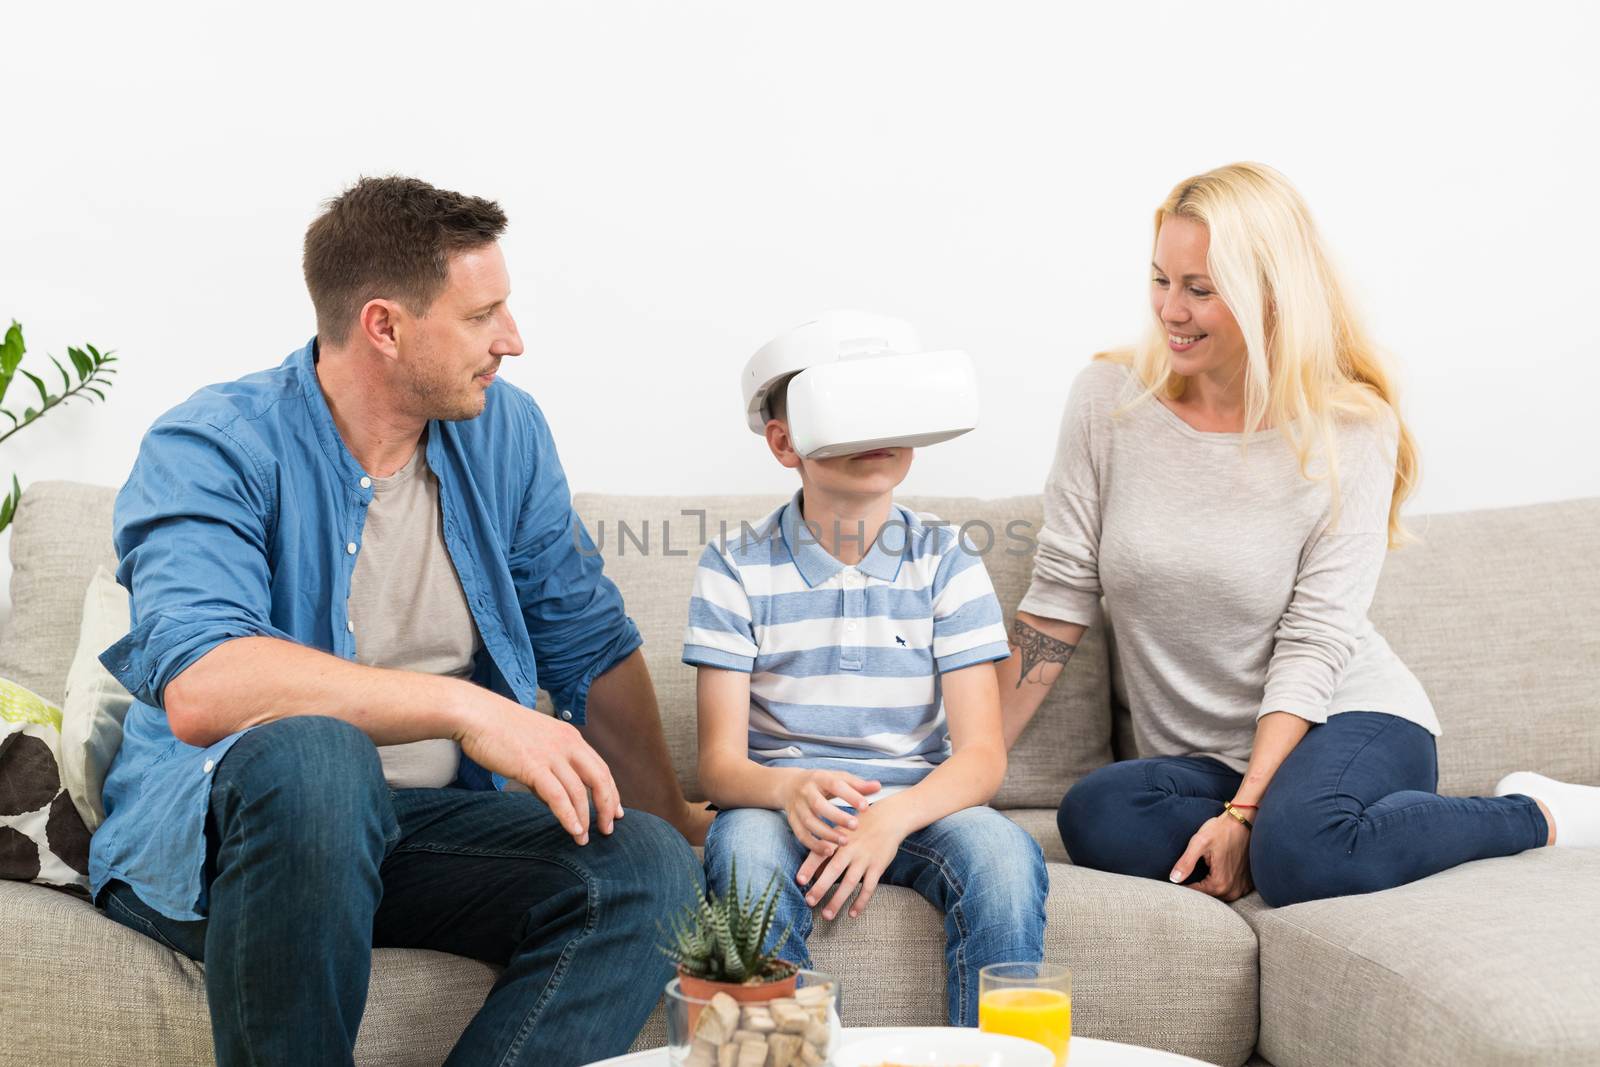 Happy family at home on living room sofa having fun playing games using virtual reality headset by kasto